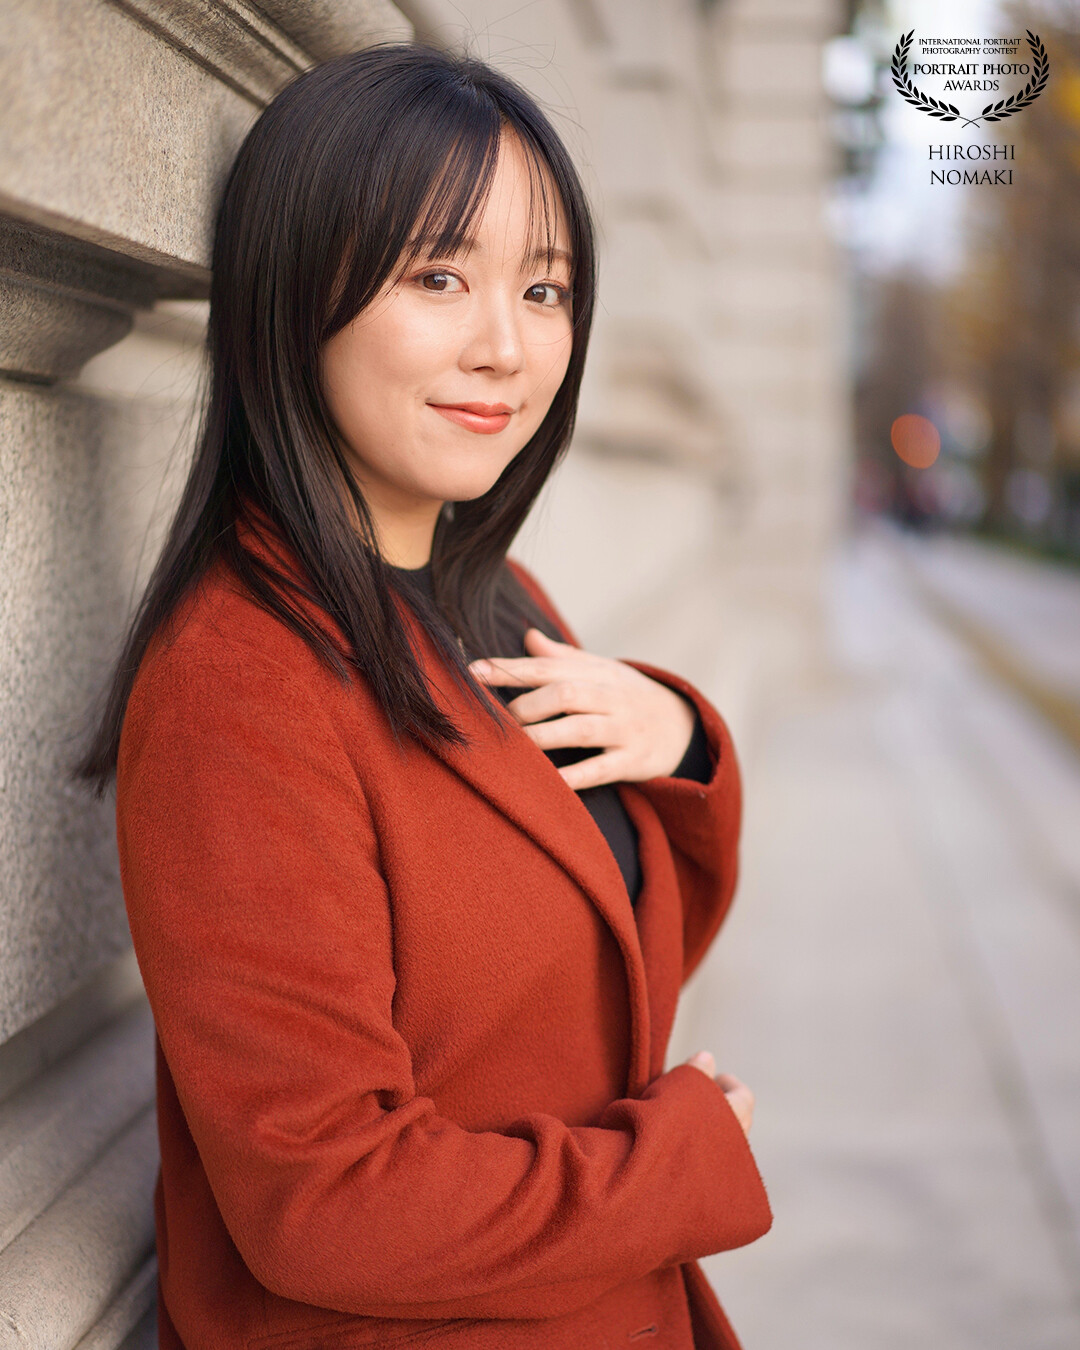 Photo Model: Shino Tachibana<br />
@shino.tachibana<br />
Location: Marunouchi, Tokyo<br />
<br />
She is a professional photo model/ actress. She shows an outstanding performance in Tokyo area now. <br />
<br />
It was beautiful sunny twilight evening. Right before the "Magic Hour".